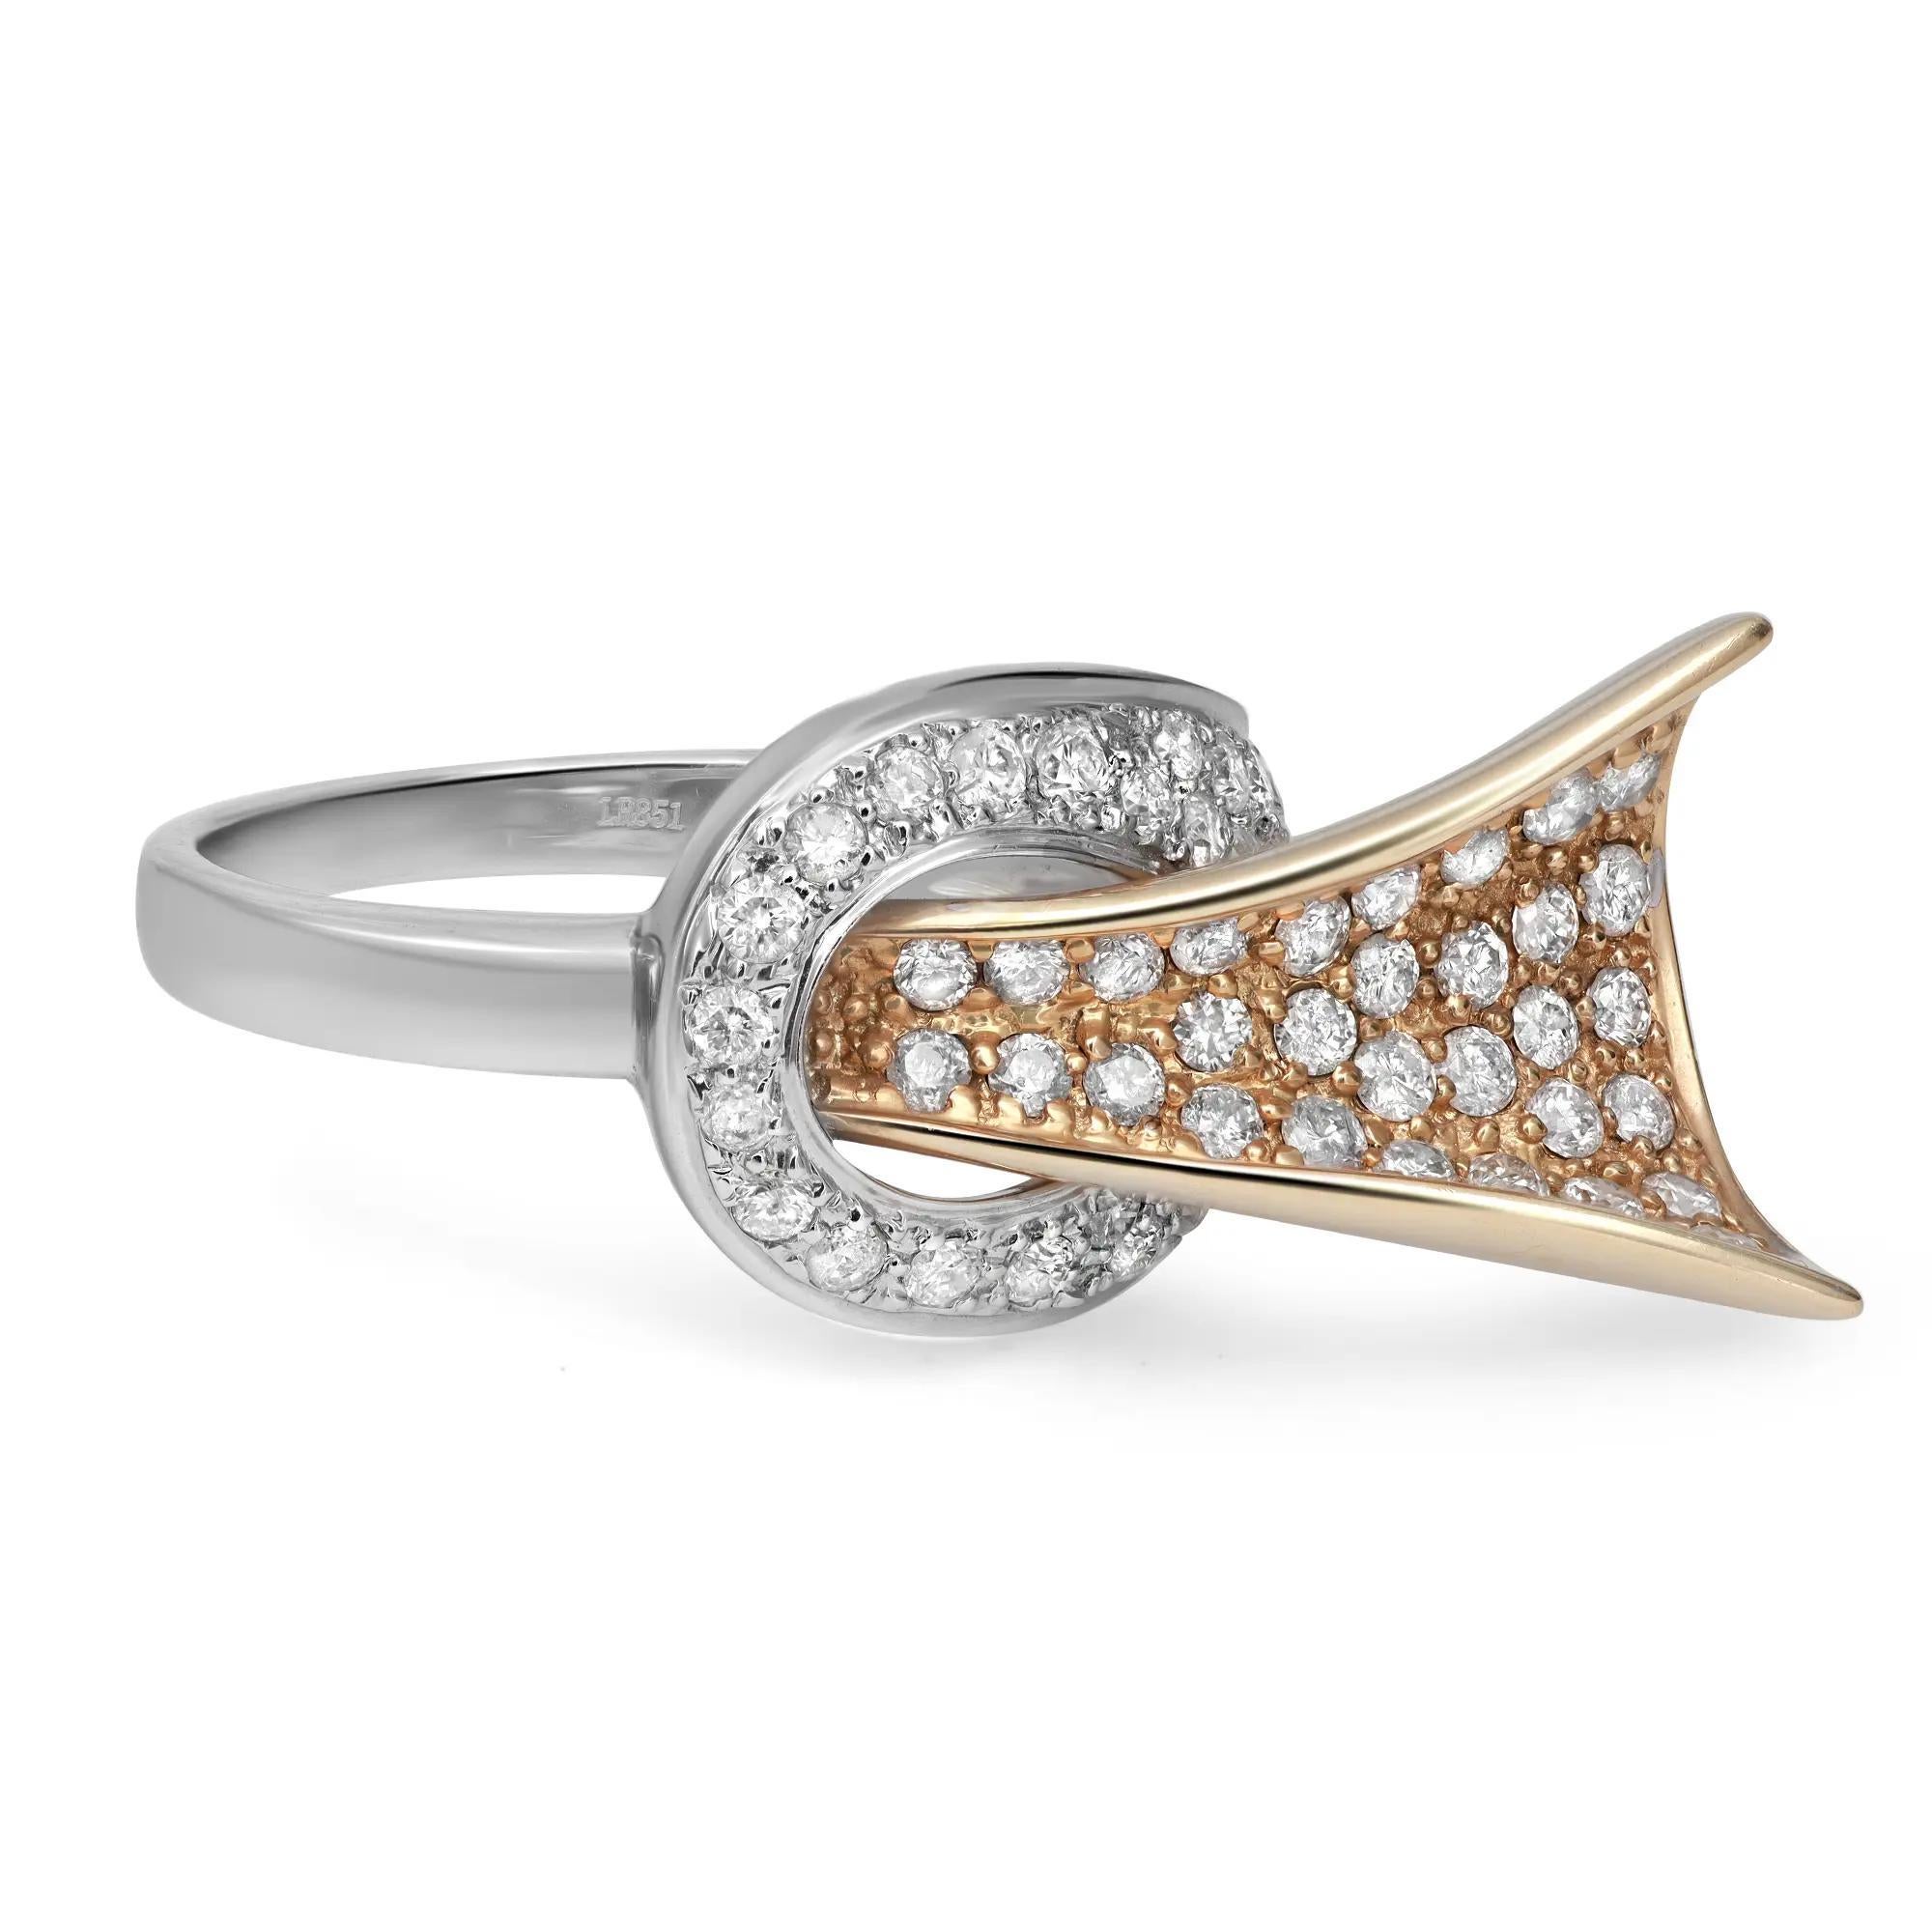 Dazzle away with this bold two tone ladies cocktail ring. Crafted in 14k white and yellow gold. Showcasing pave set round brilliant cut diamonds weighing 1.27 carats. Diamond quality: I color and SI1 clarity. Ring size: 7.5. Total weight: 7.09